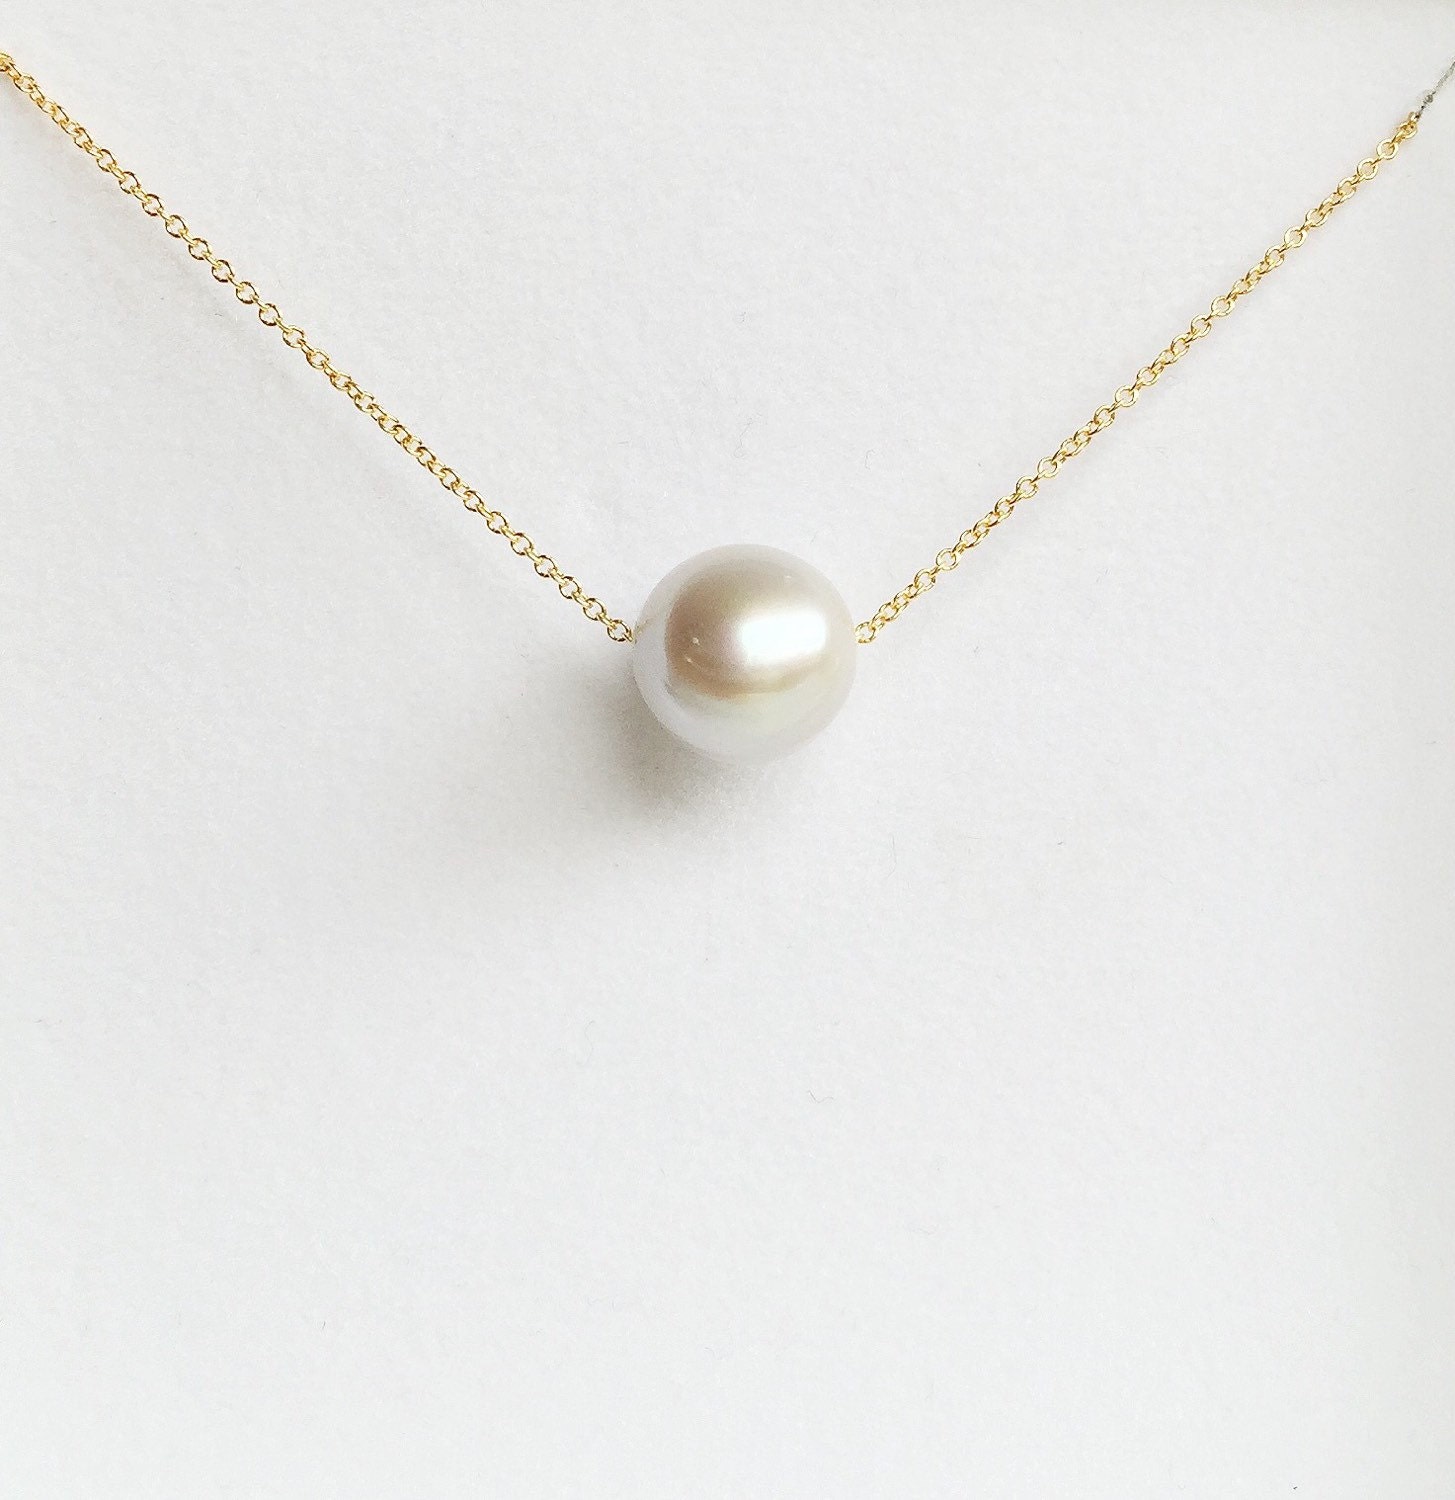 Necklace Kea Silver Pearl Necklace Floating Pearl Necklace - Etsy